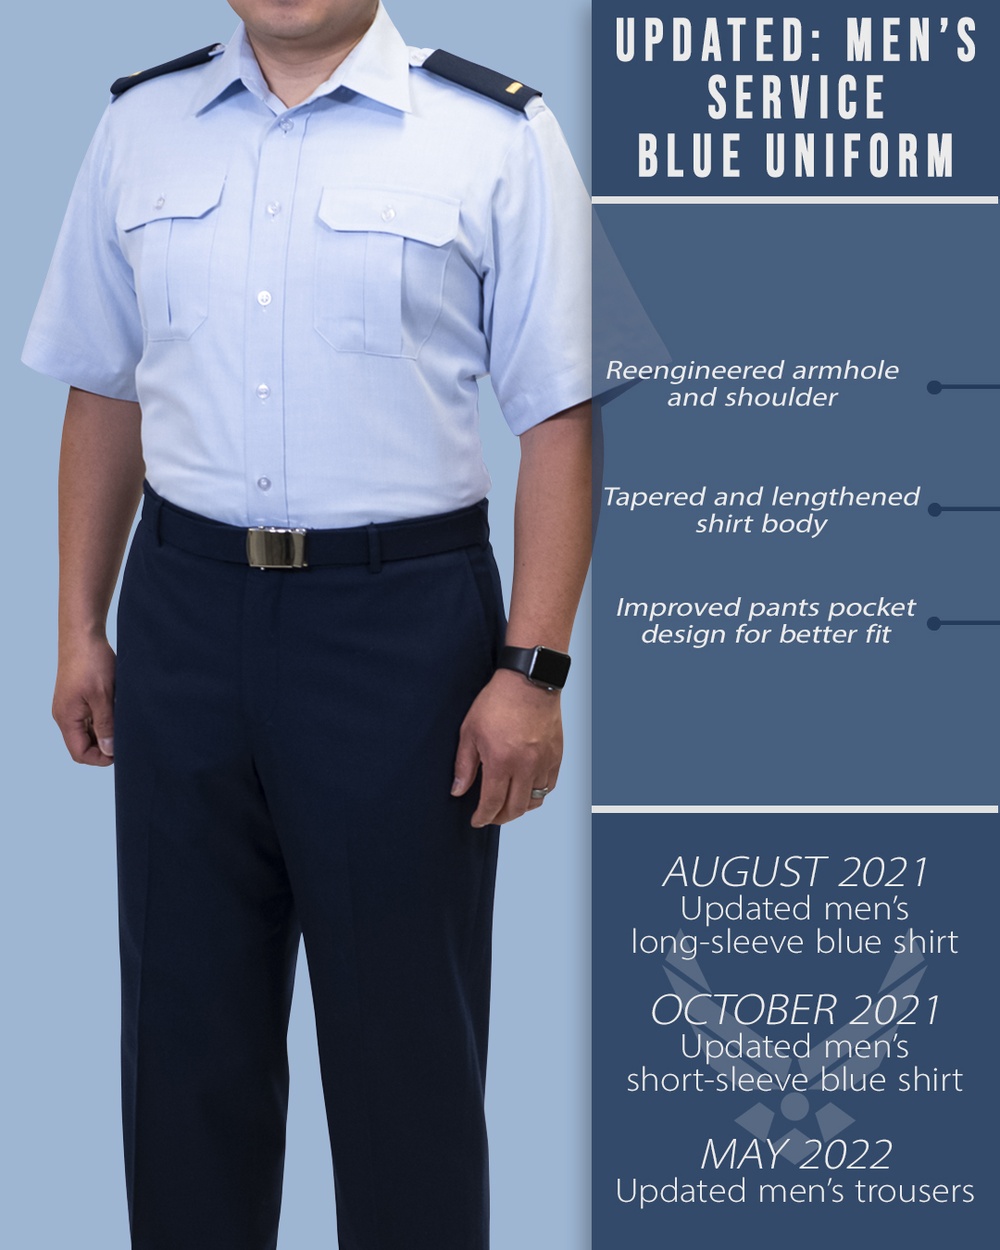 DVIDS Images Air Force releases additional dress and appearance